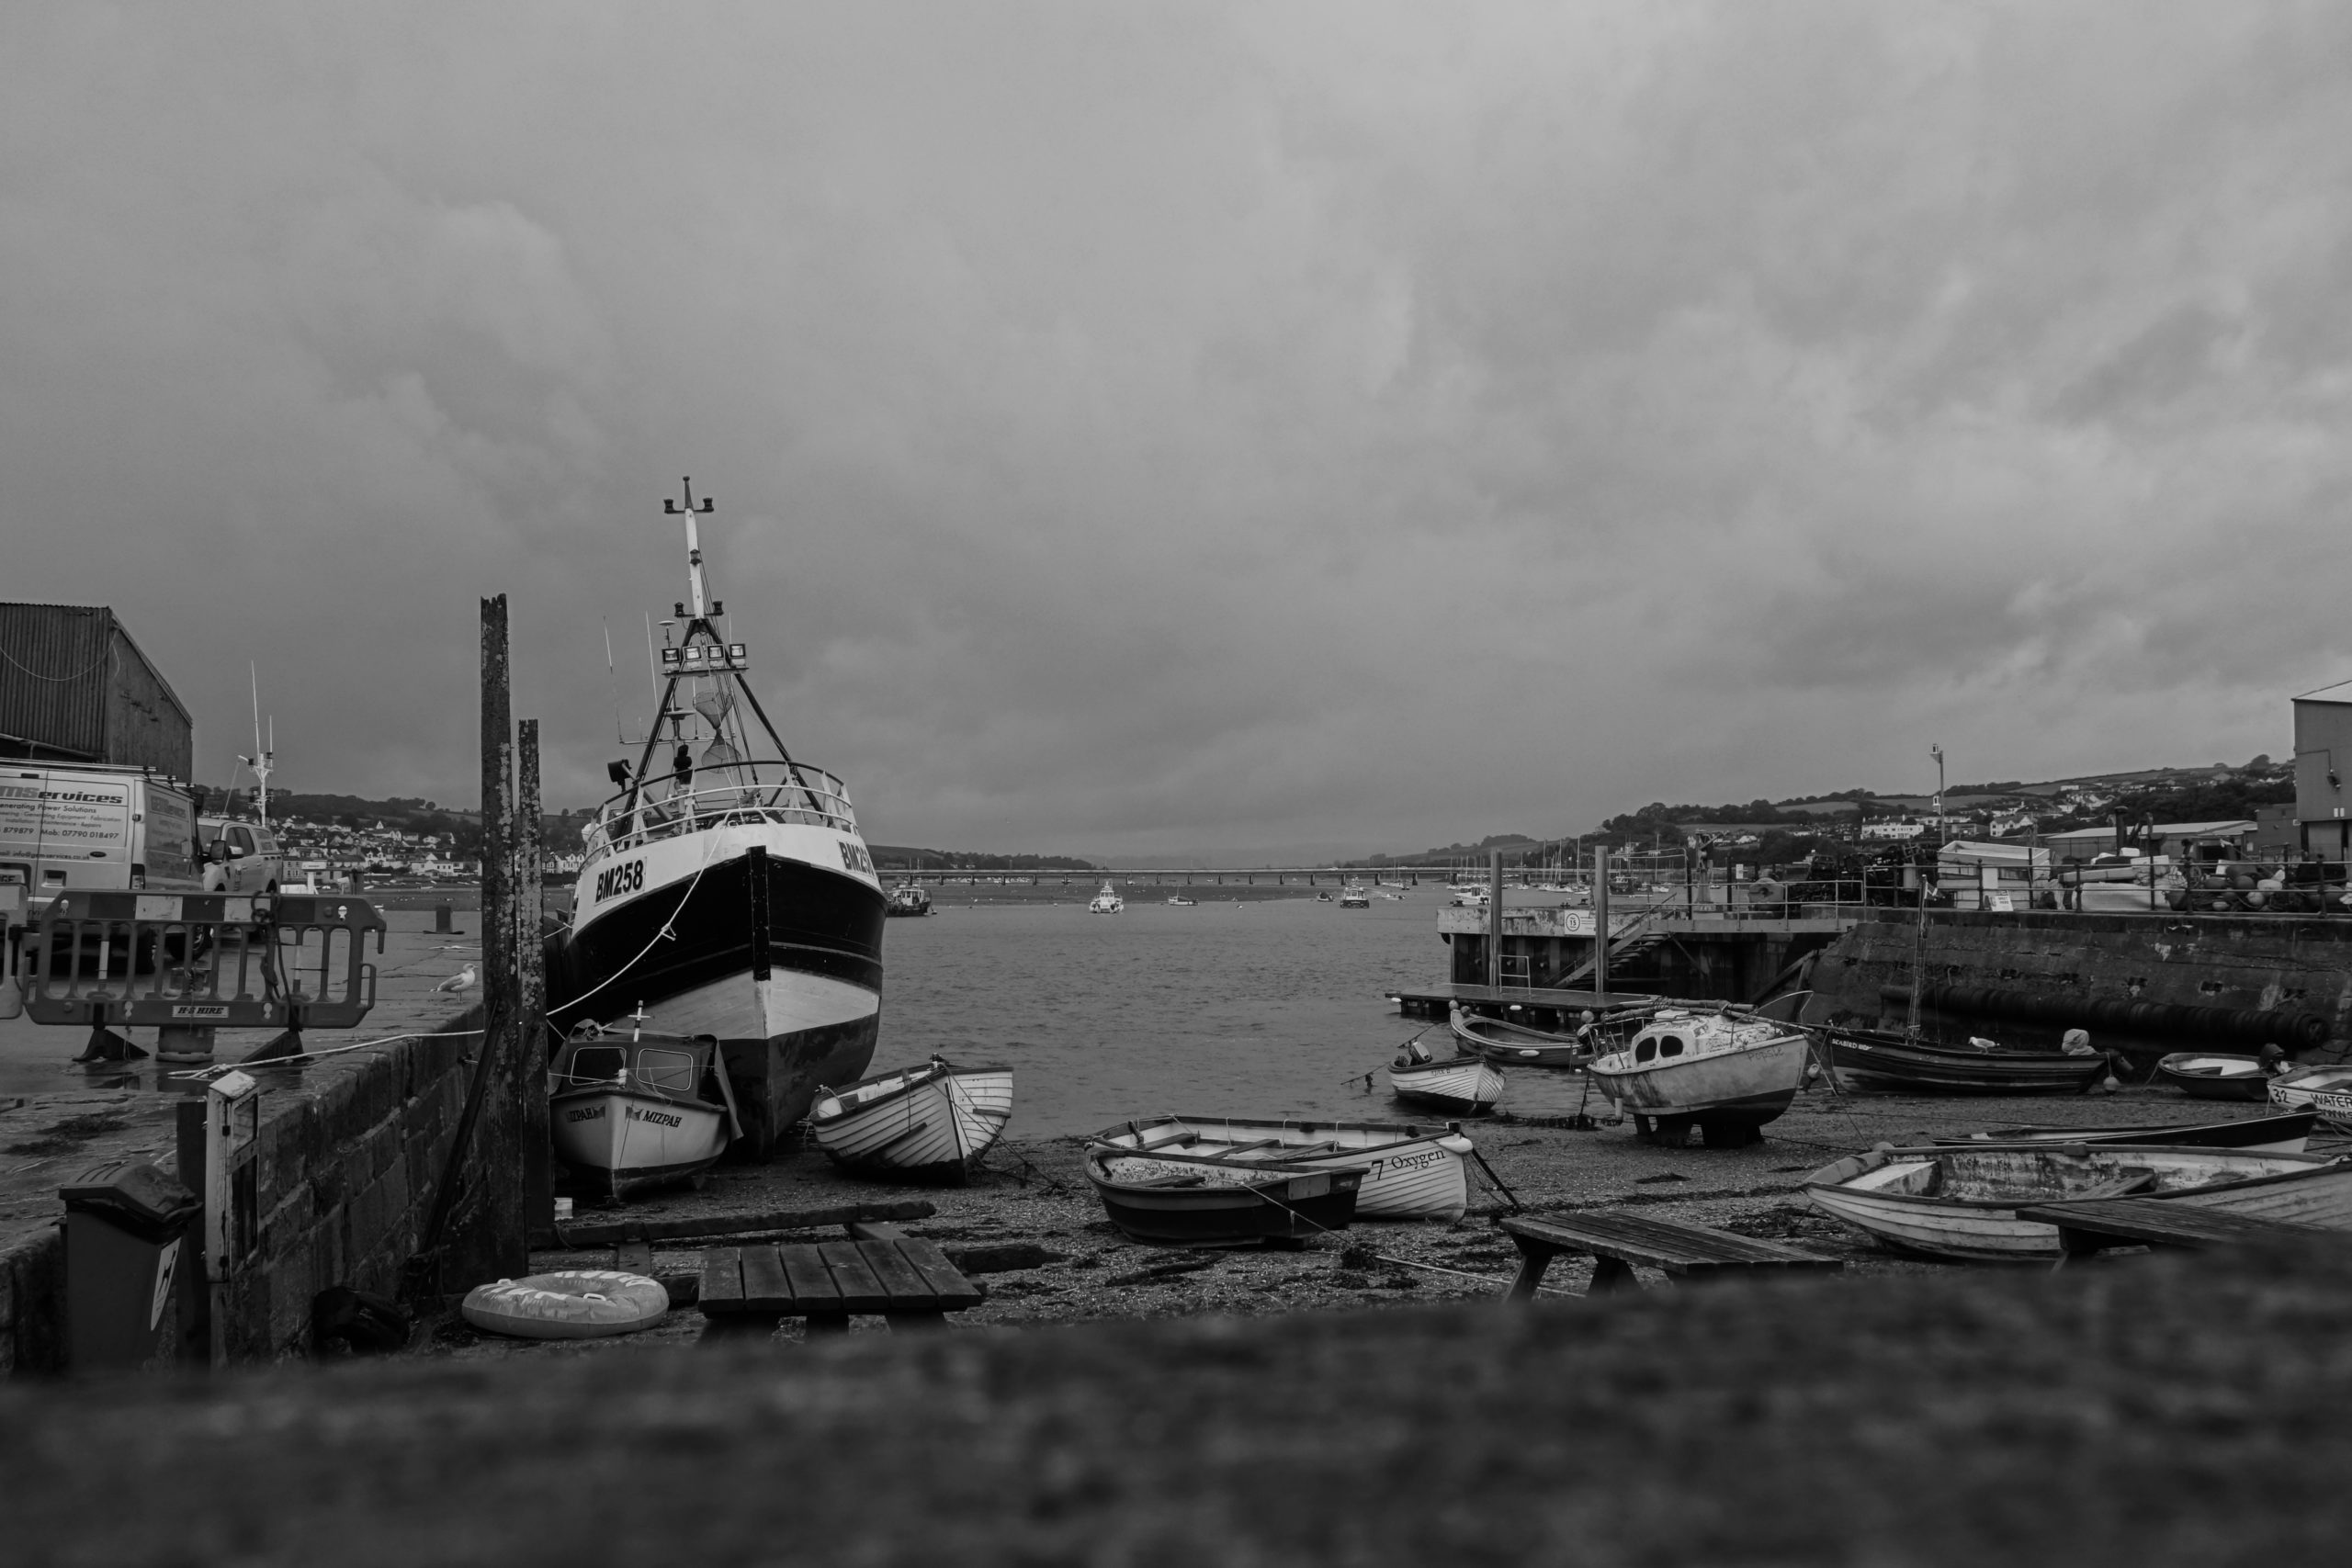 A harbour boat in South Devon, England